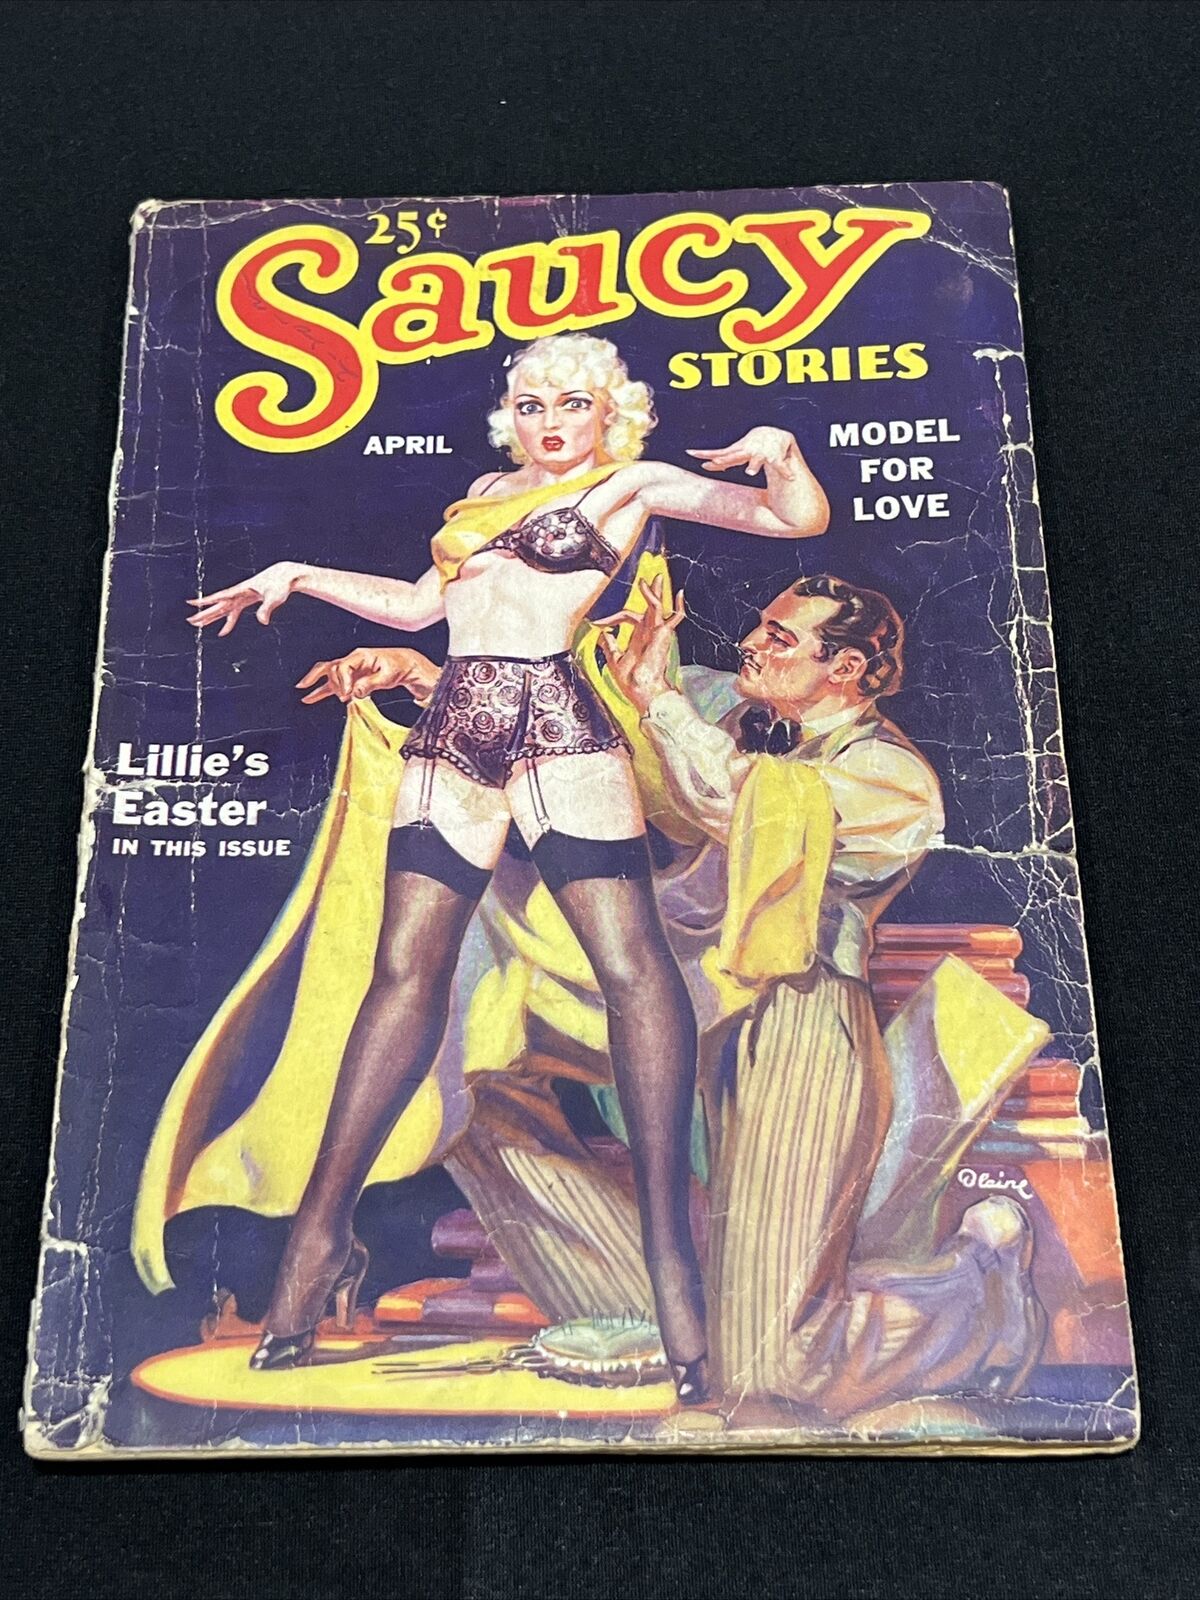 Saucy Stories Missing Back Cover 1936 April Classic Pulp Magazine Key Grail